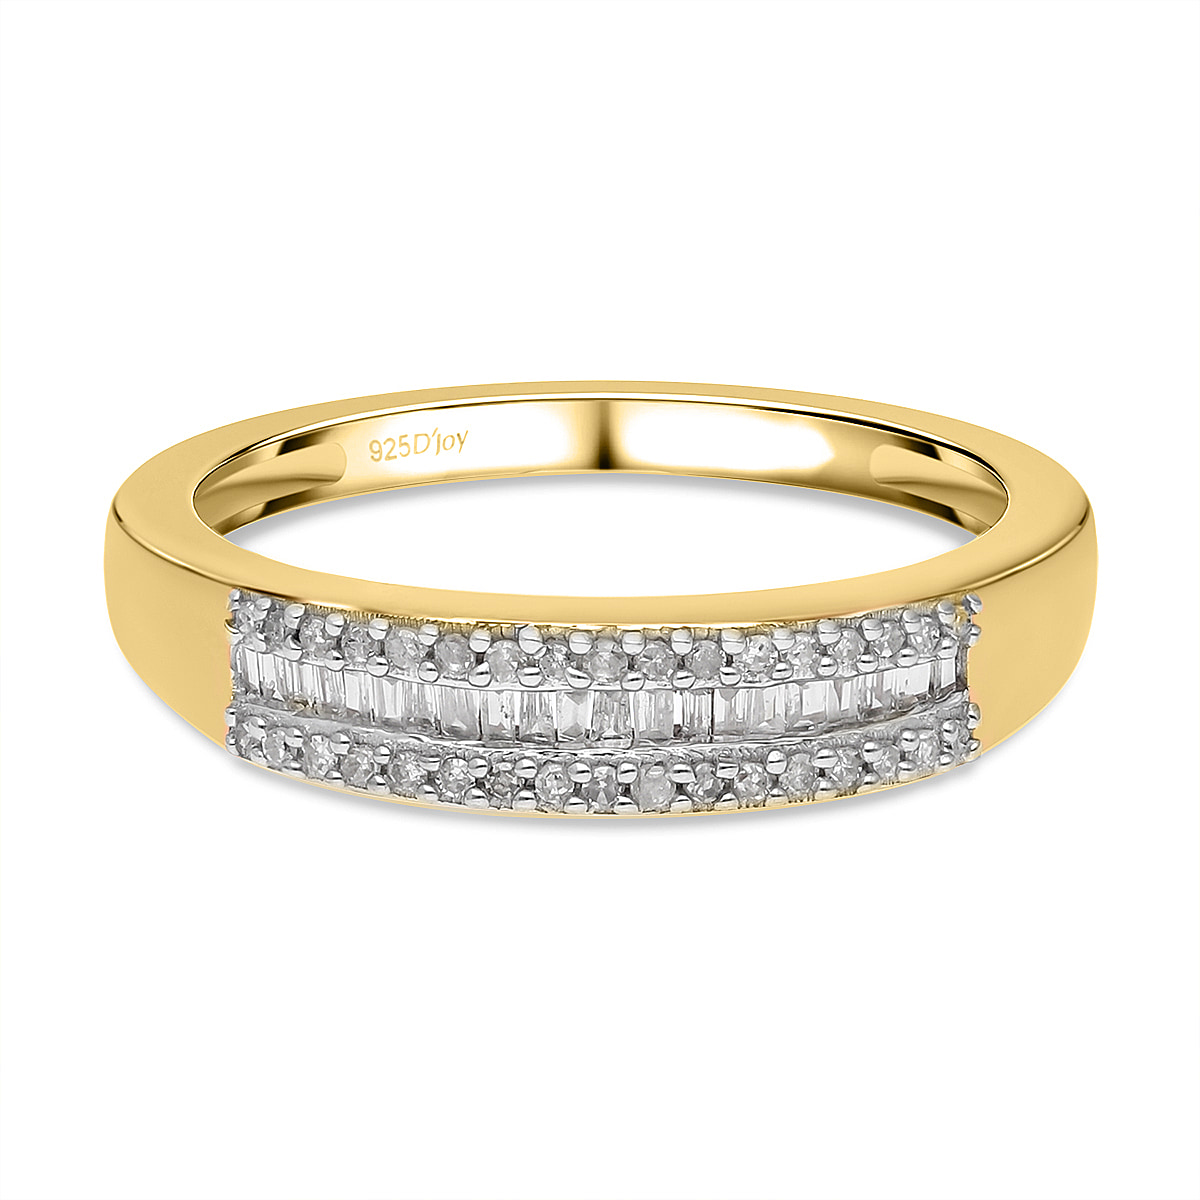 The Ultimate Diamond Wedding Band Ring in 18K Vermeil Yellow Gold Plated Sterling Silver